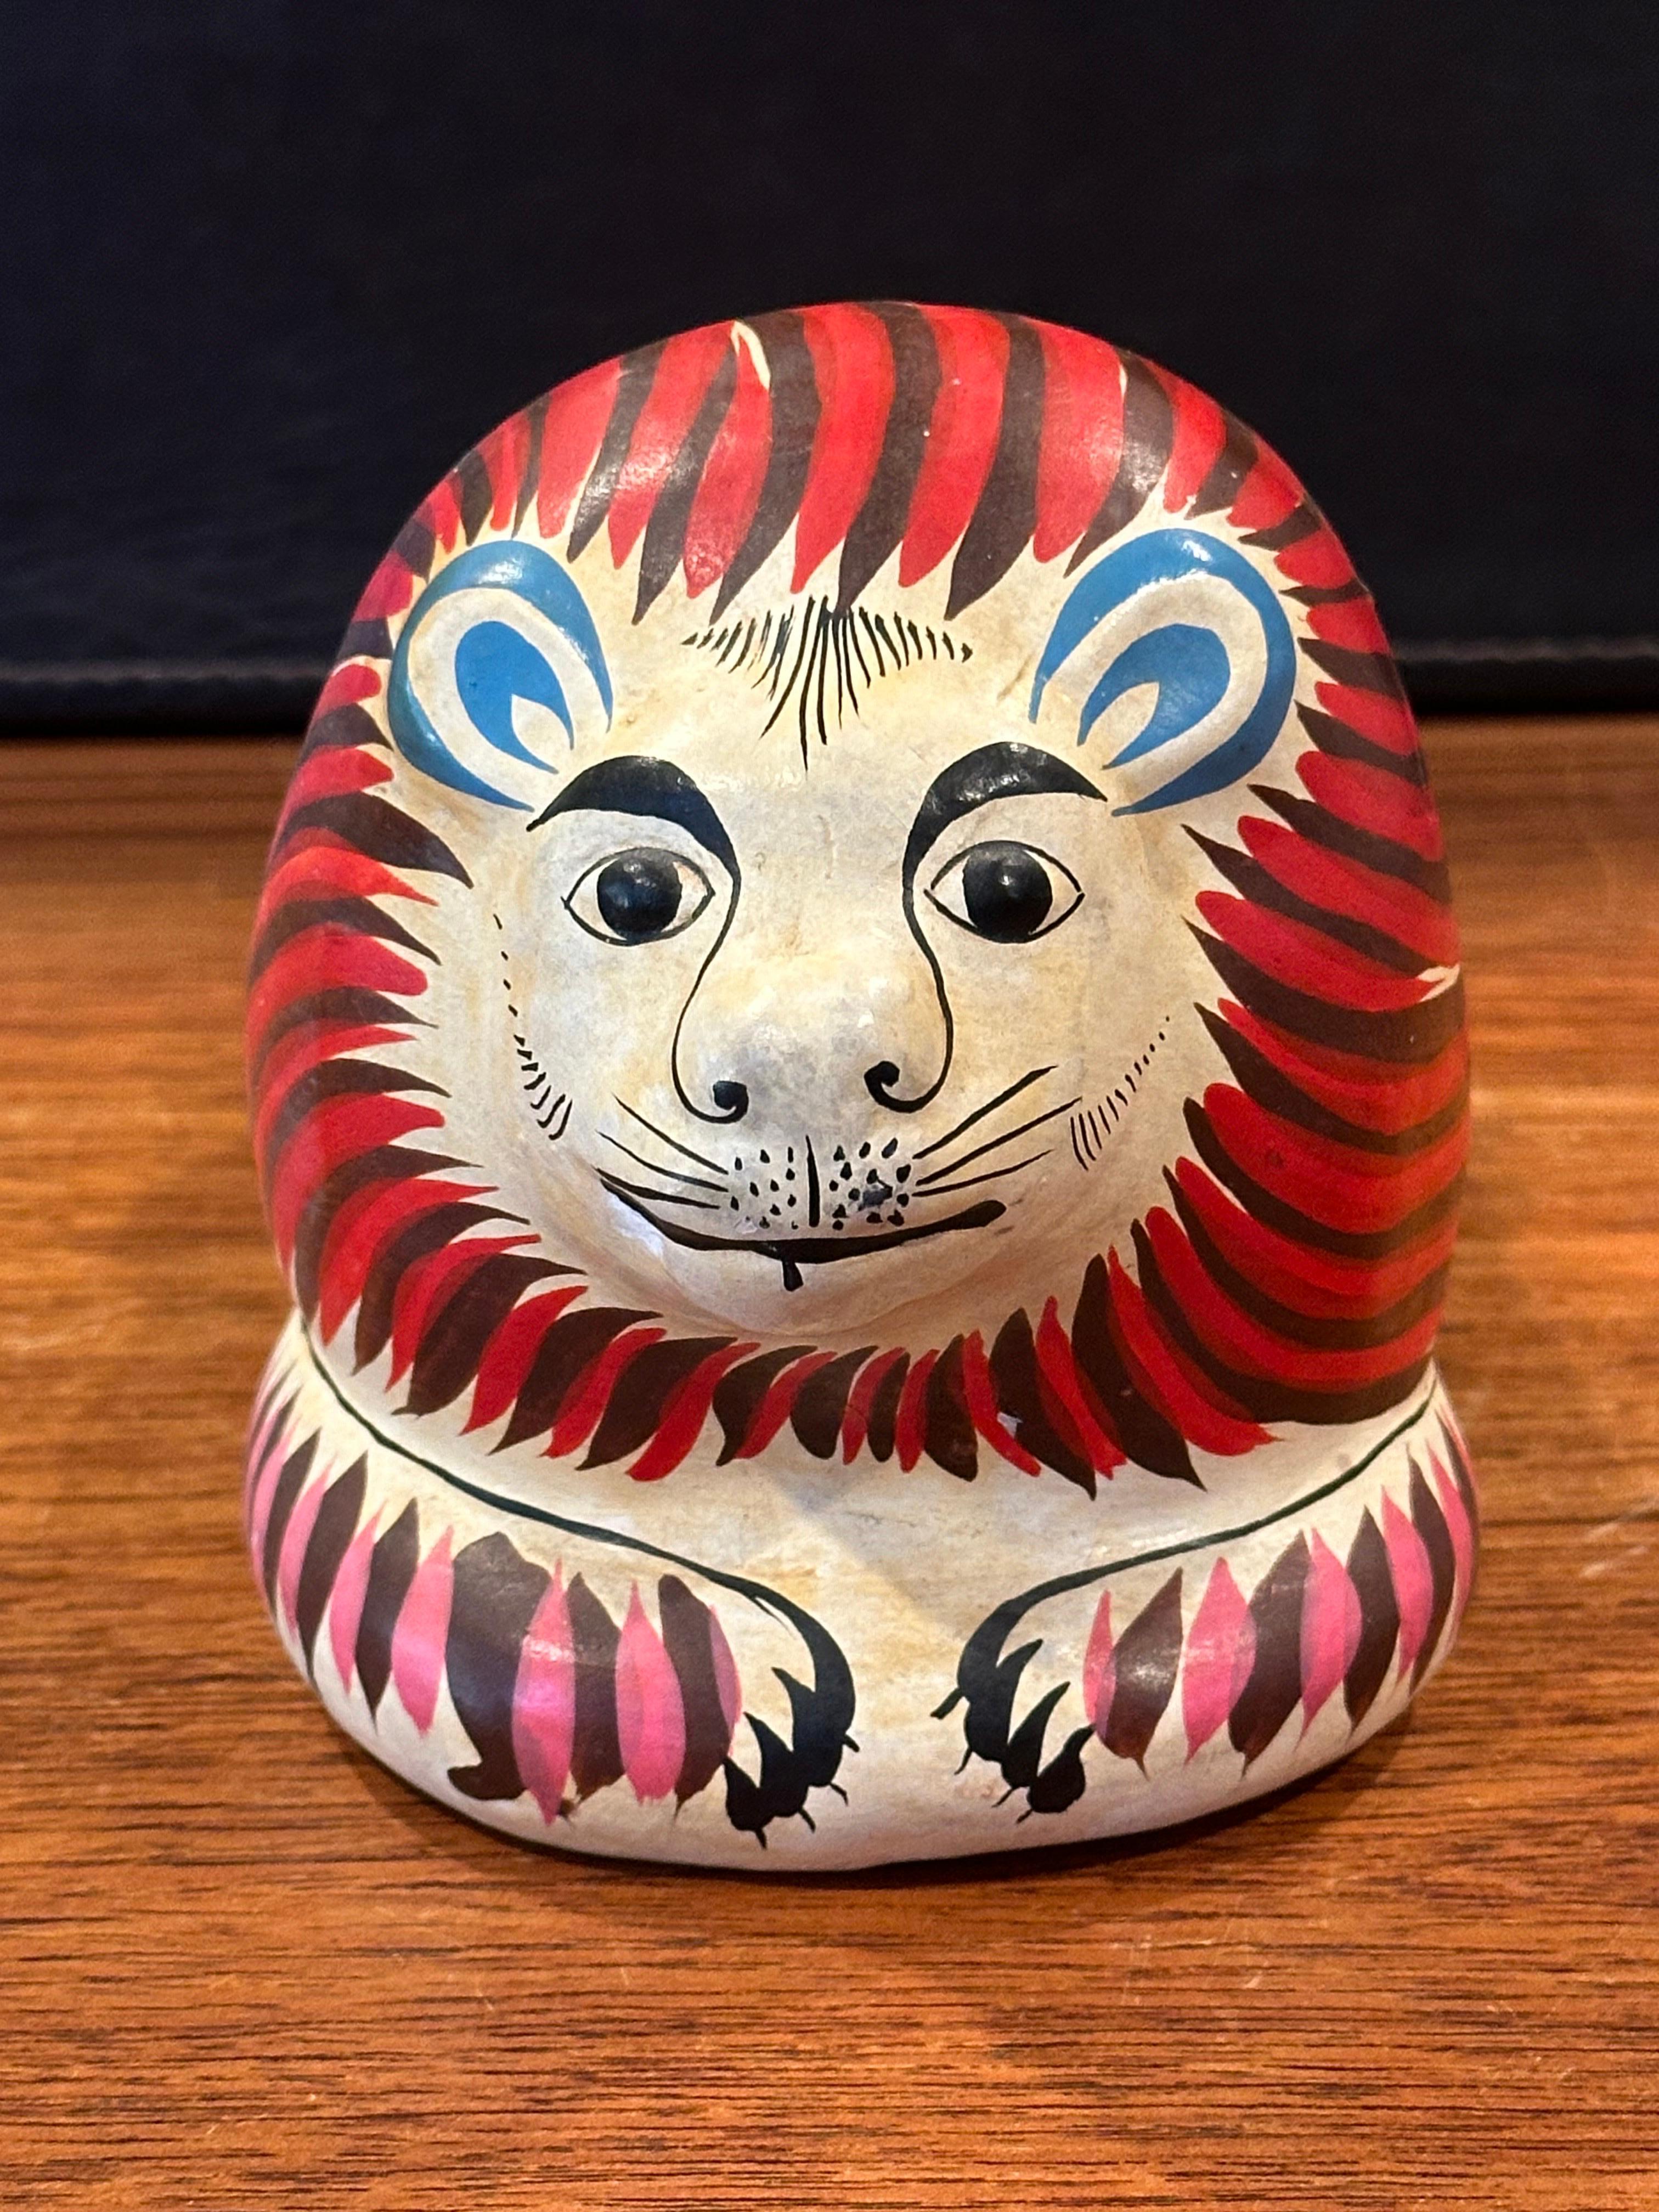 Whimsical hand painted ceramic lion sculpture in the style of Sergio Bustamante, circa 1980s. The piece is in good vintage condition and measures 4.5